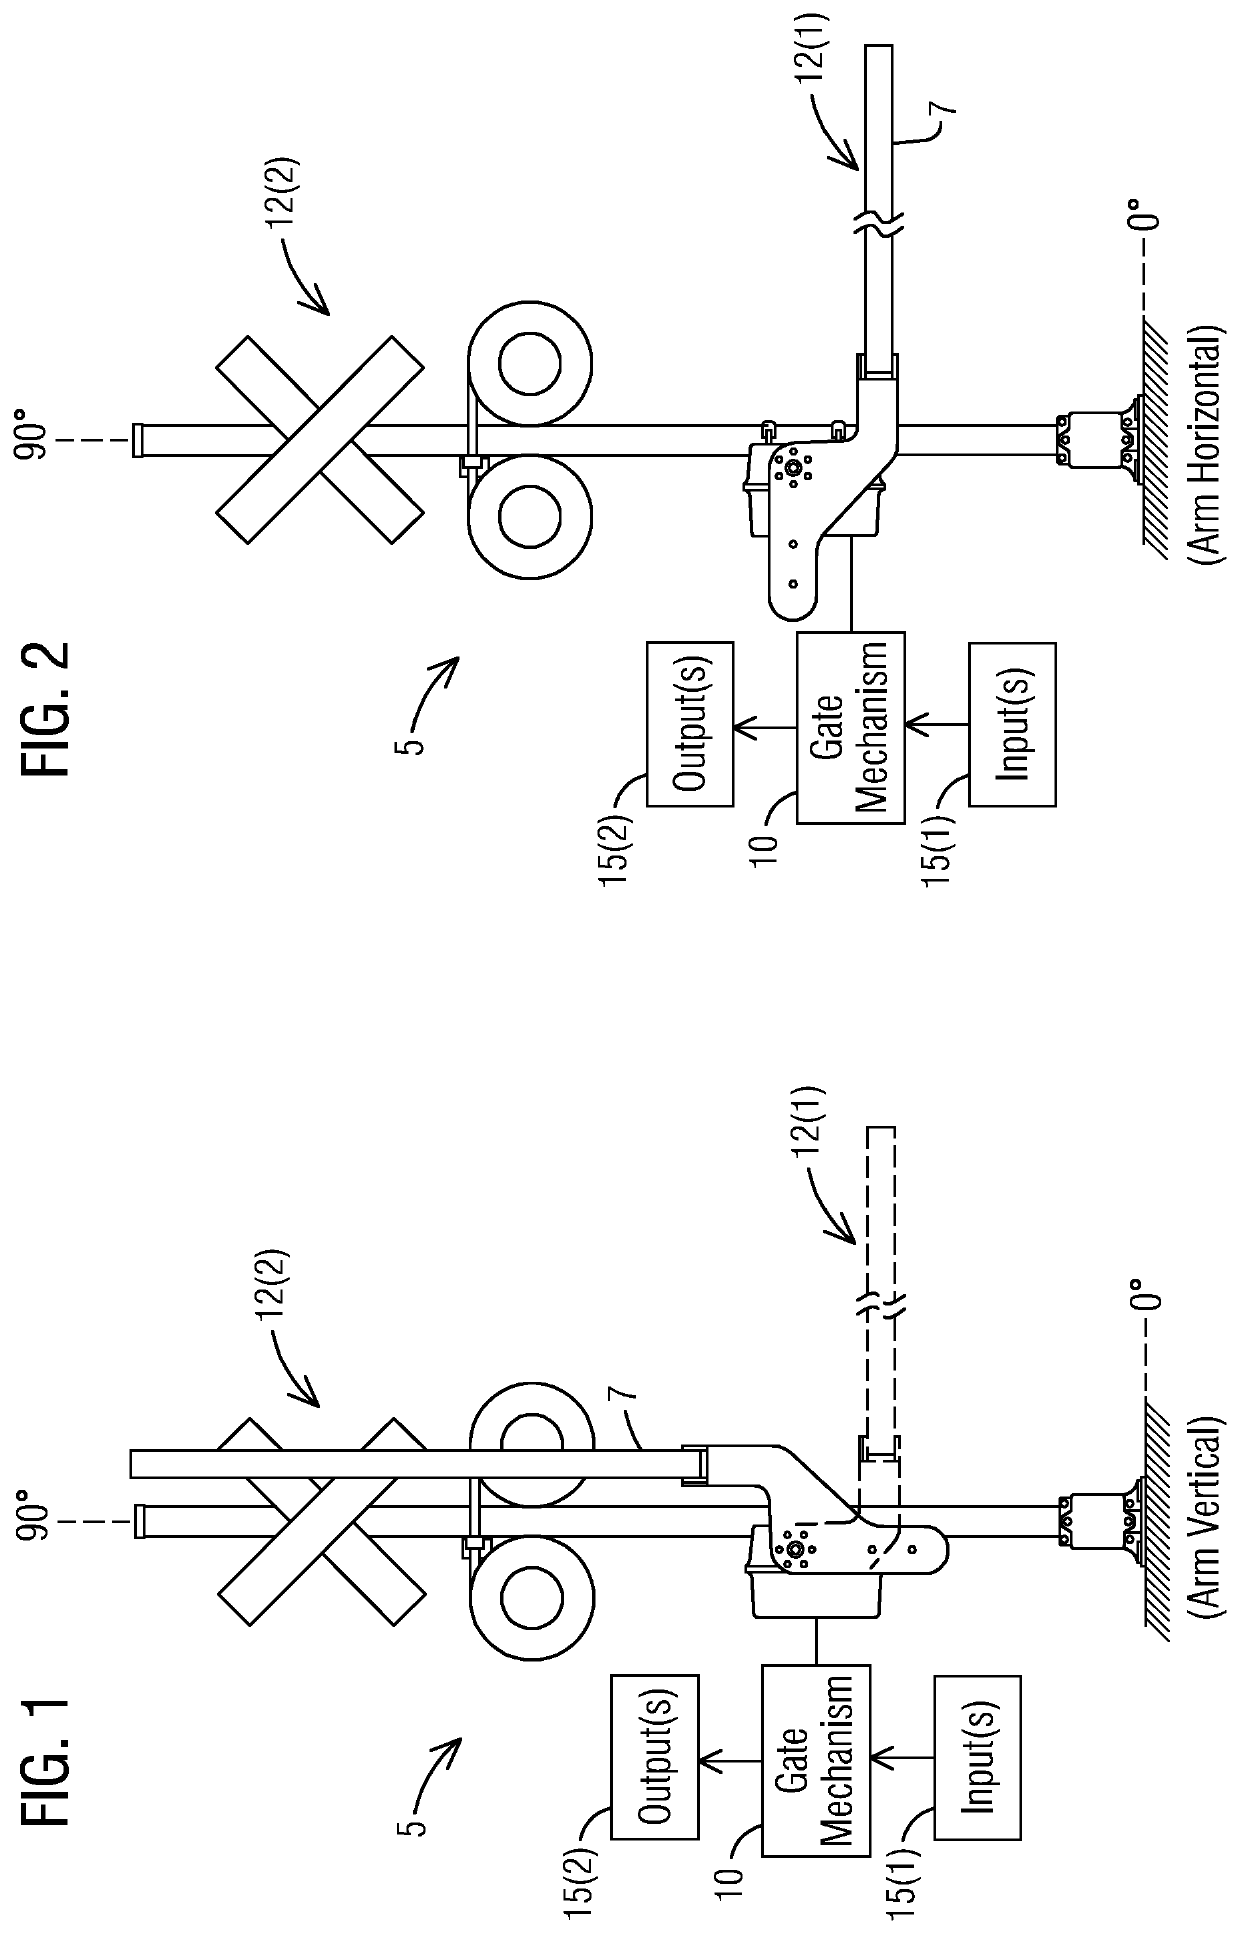 Highway grade crossing gate system including a gate mechanism to rotate a gate arm with human machine interface and voltage reduction circuit